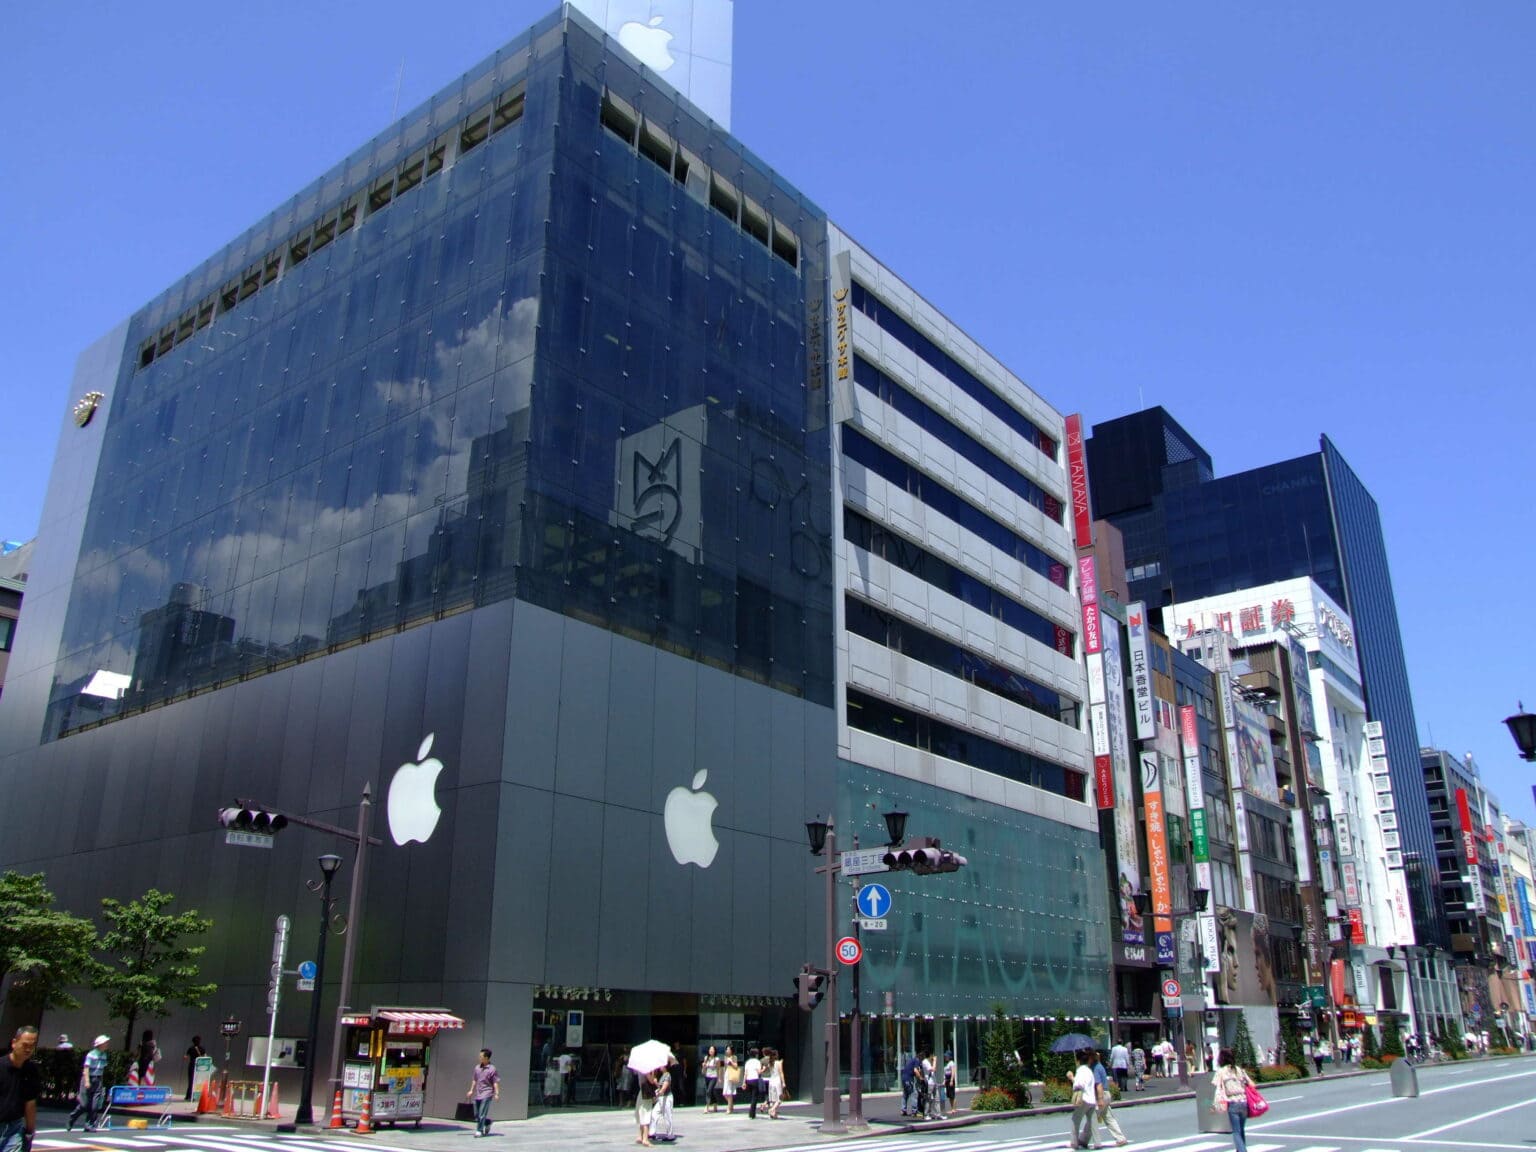 Apple's first non-U.S. Apple Store was located in Tokyo, Japan.